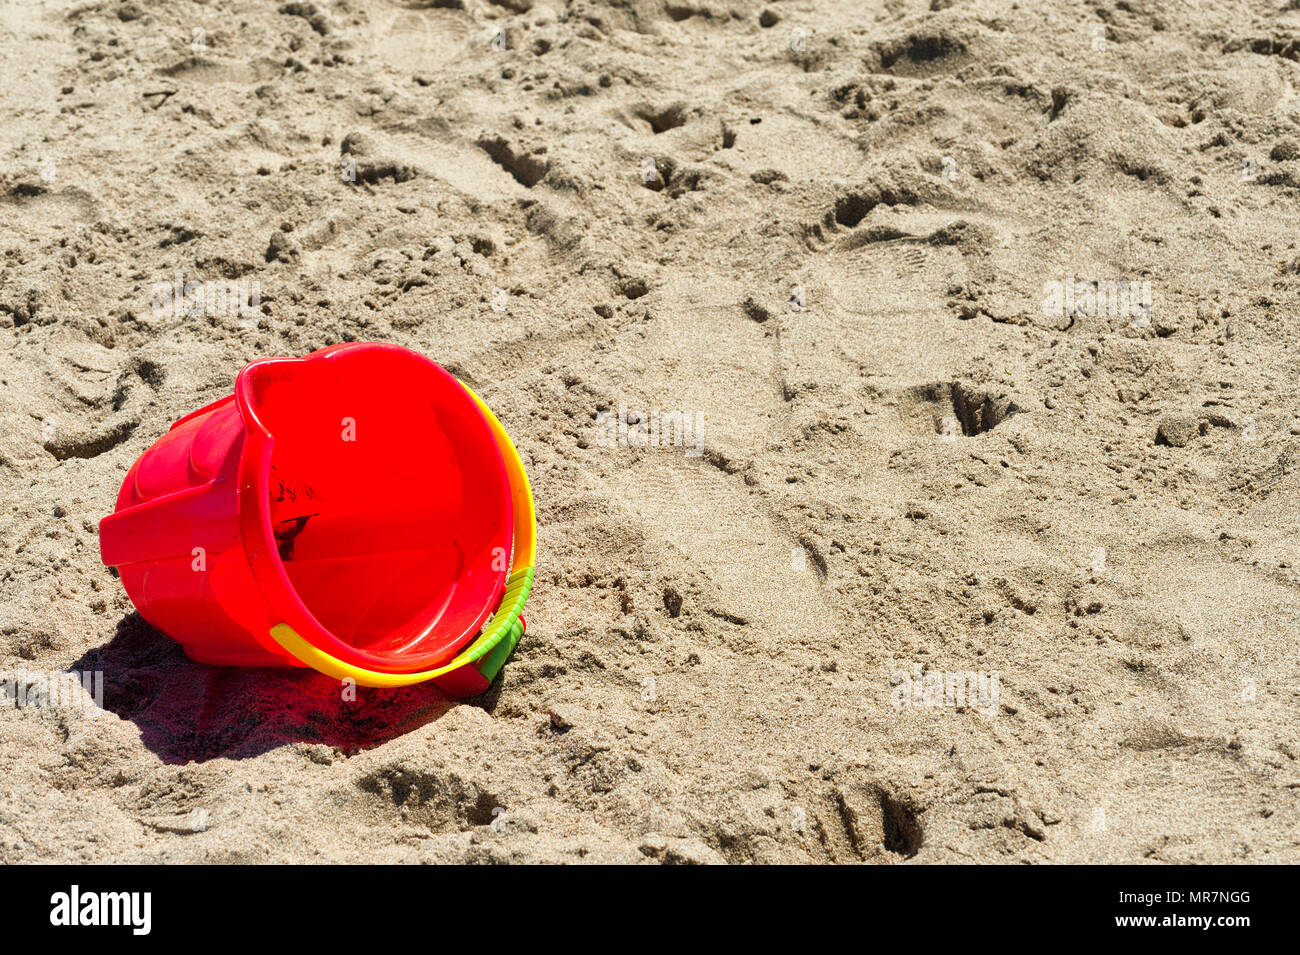 A closeup of a red bucket left on the sandy beach Stock Photo